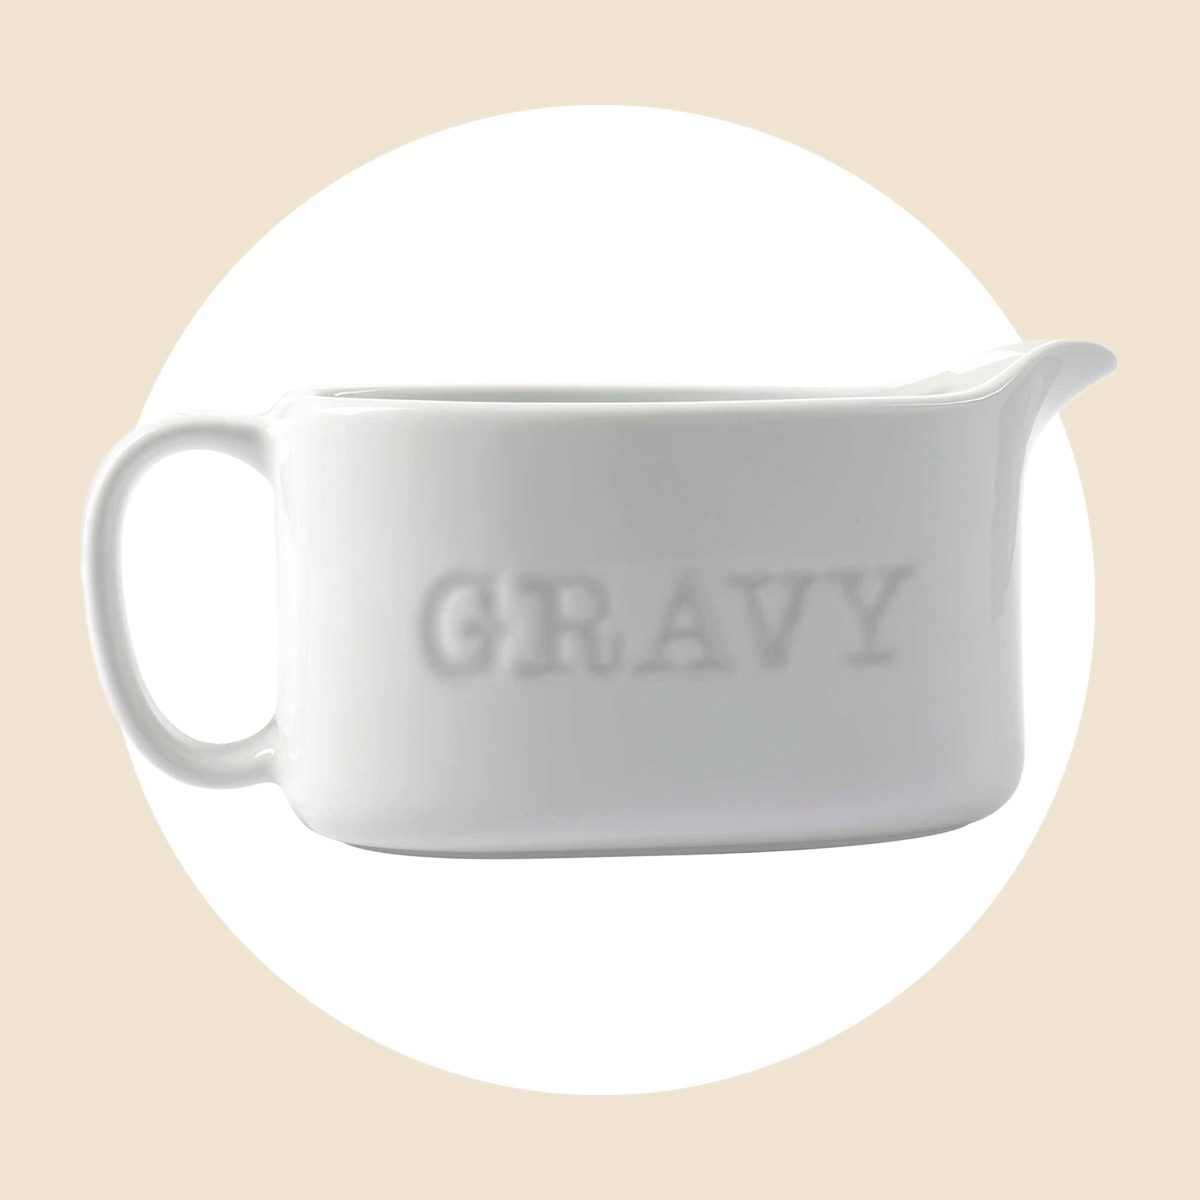 Our Table Gravy Boat